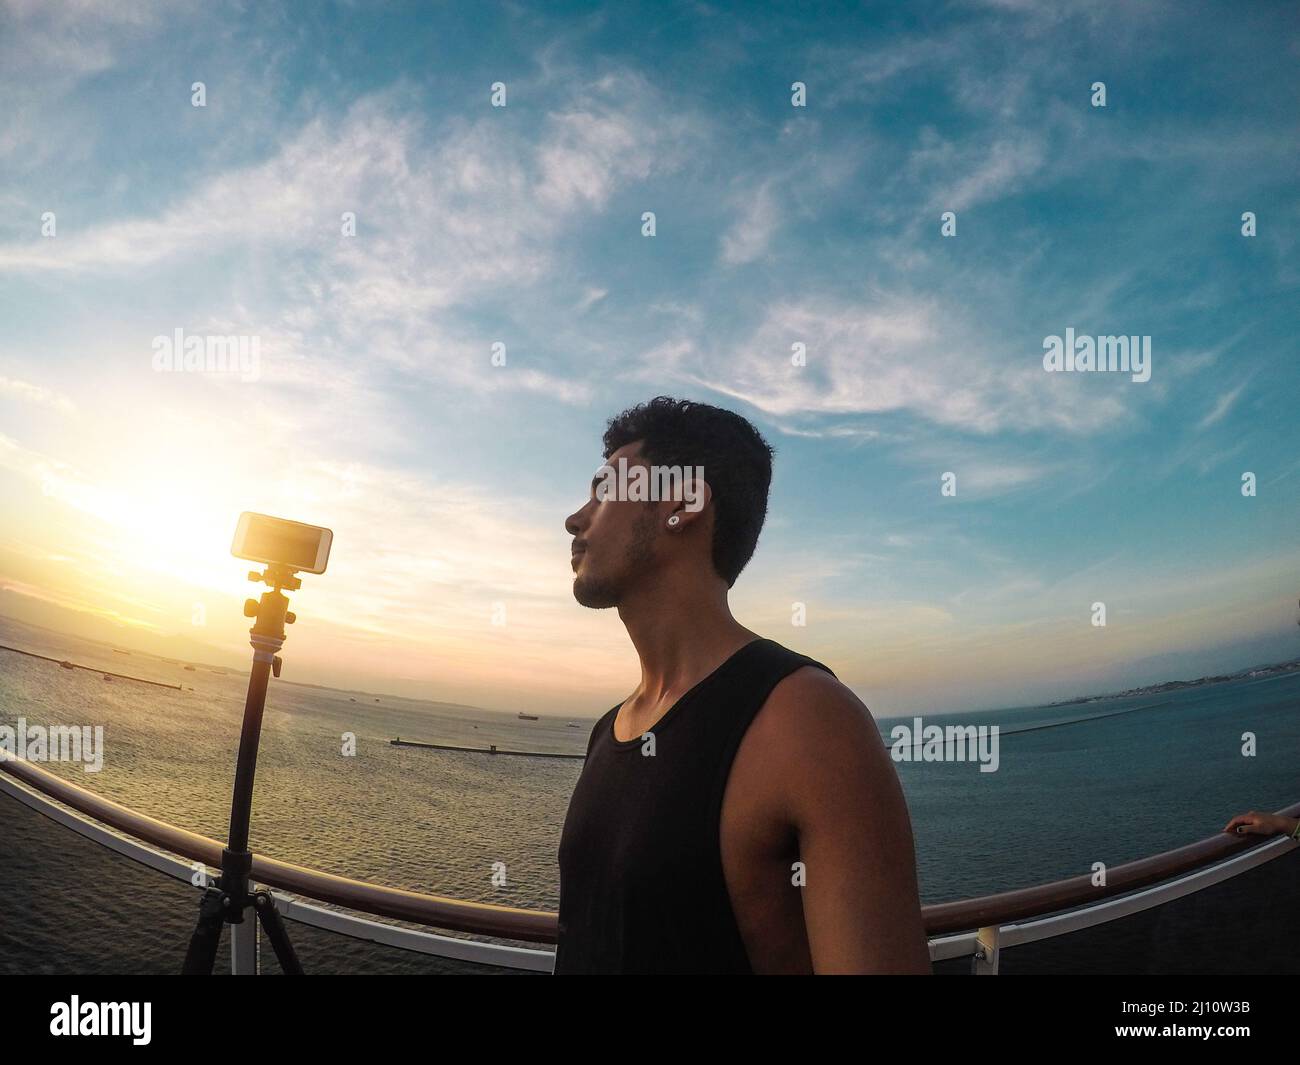 Portrait of a young black male tourist on the deck of a cruise ship in front of a sunset sky. African tourist on the beach trip. Stock Photo